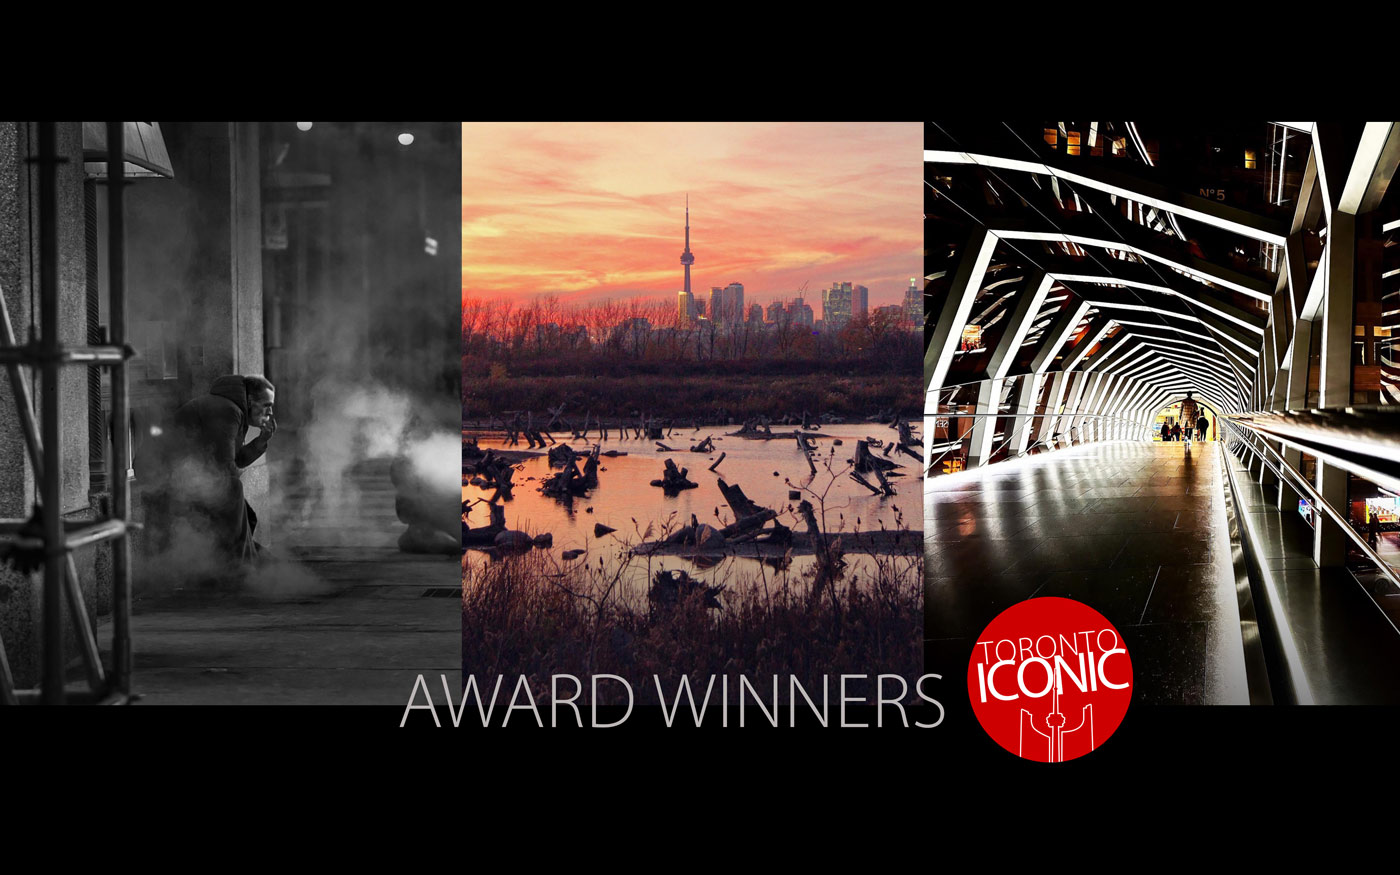 Announcement: Congrats to Winners of the Iconic Toronto Photo Contest by Tdot Shots (Review and Critique)